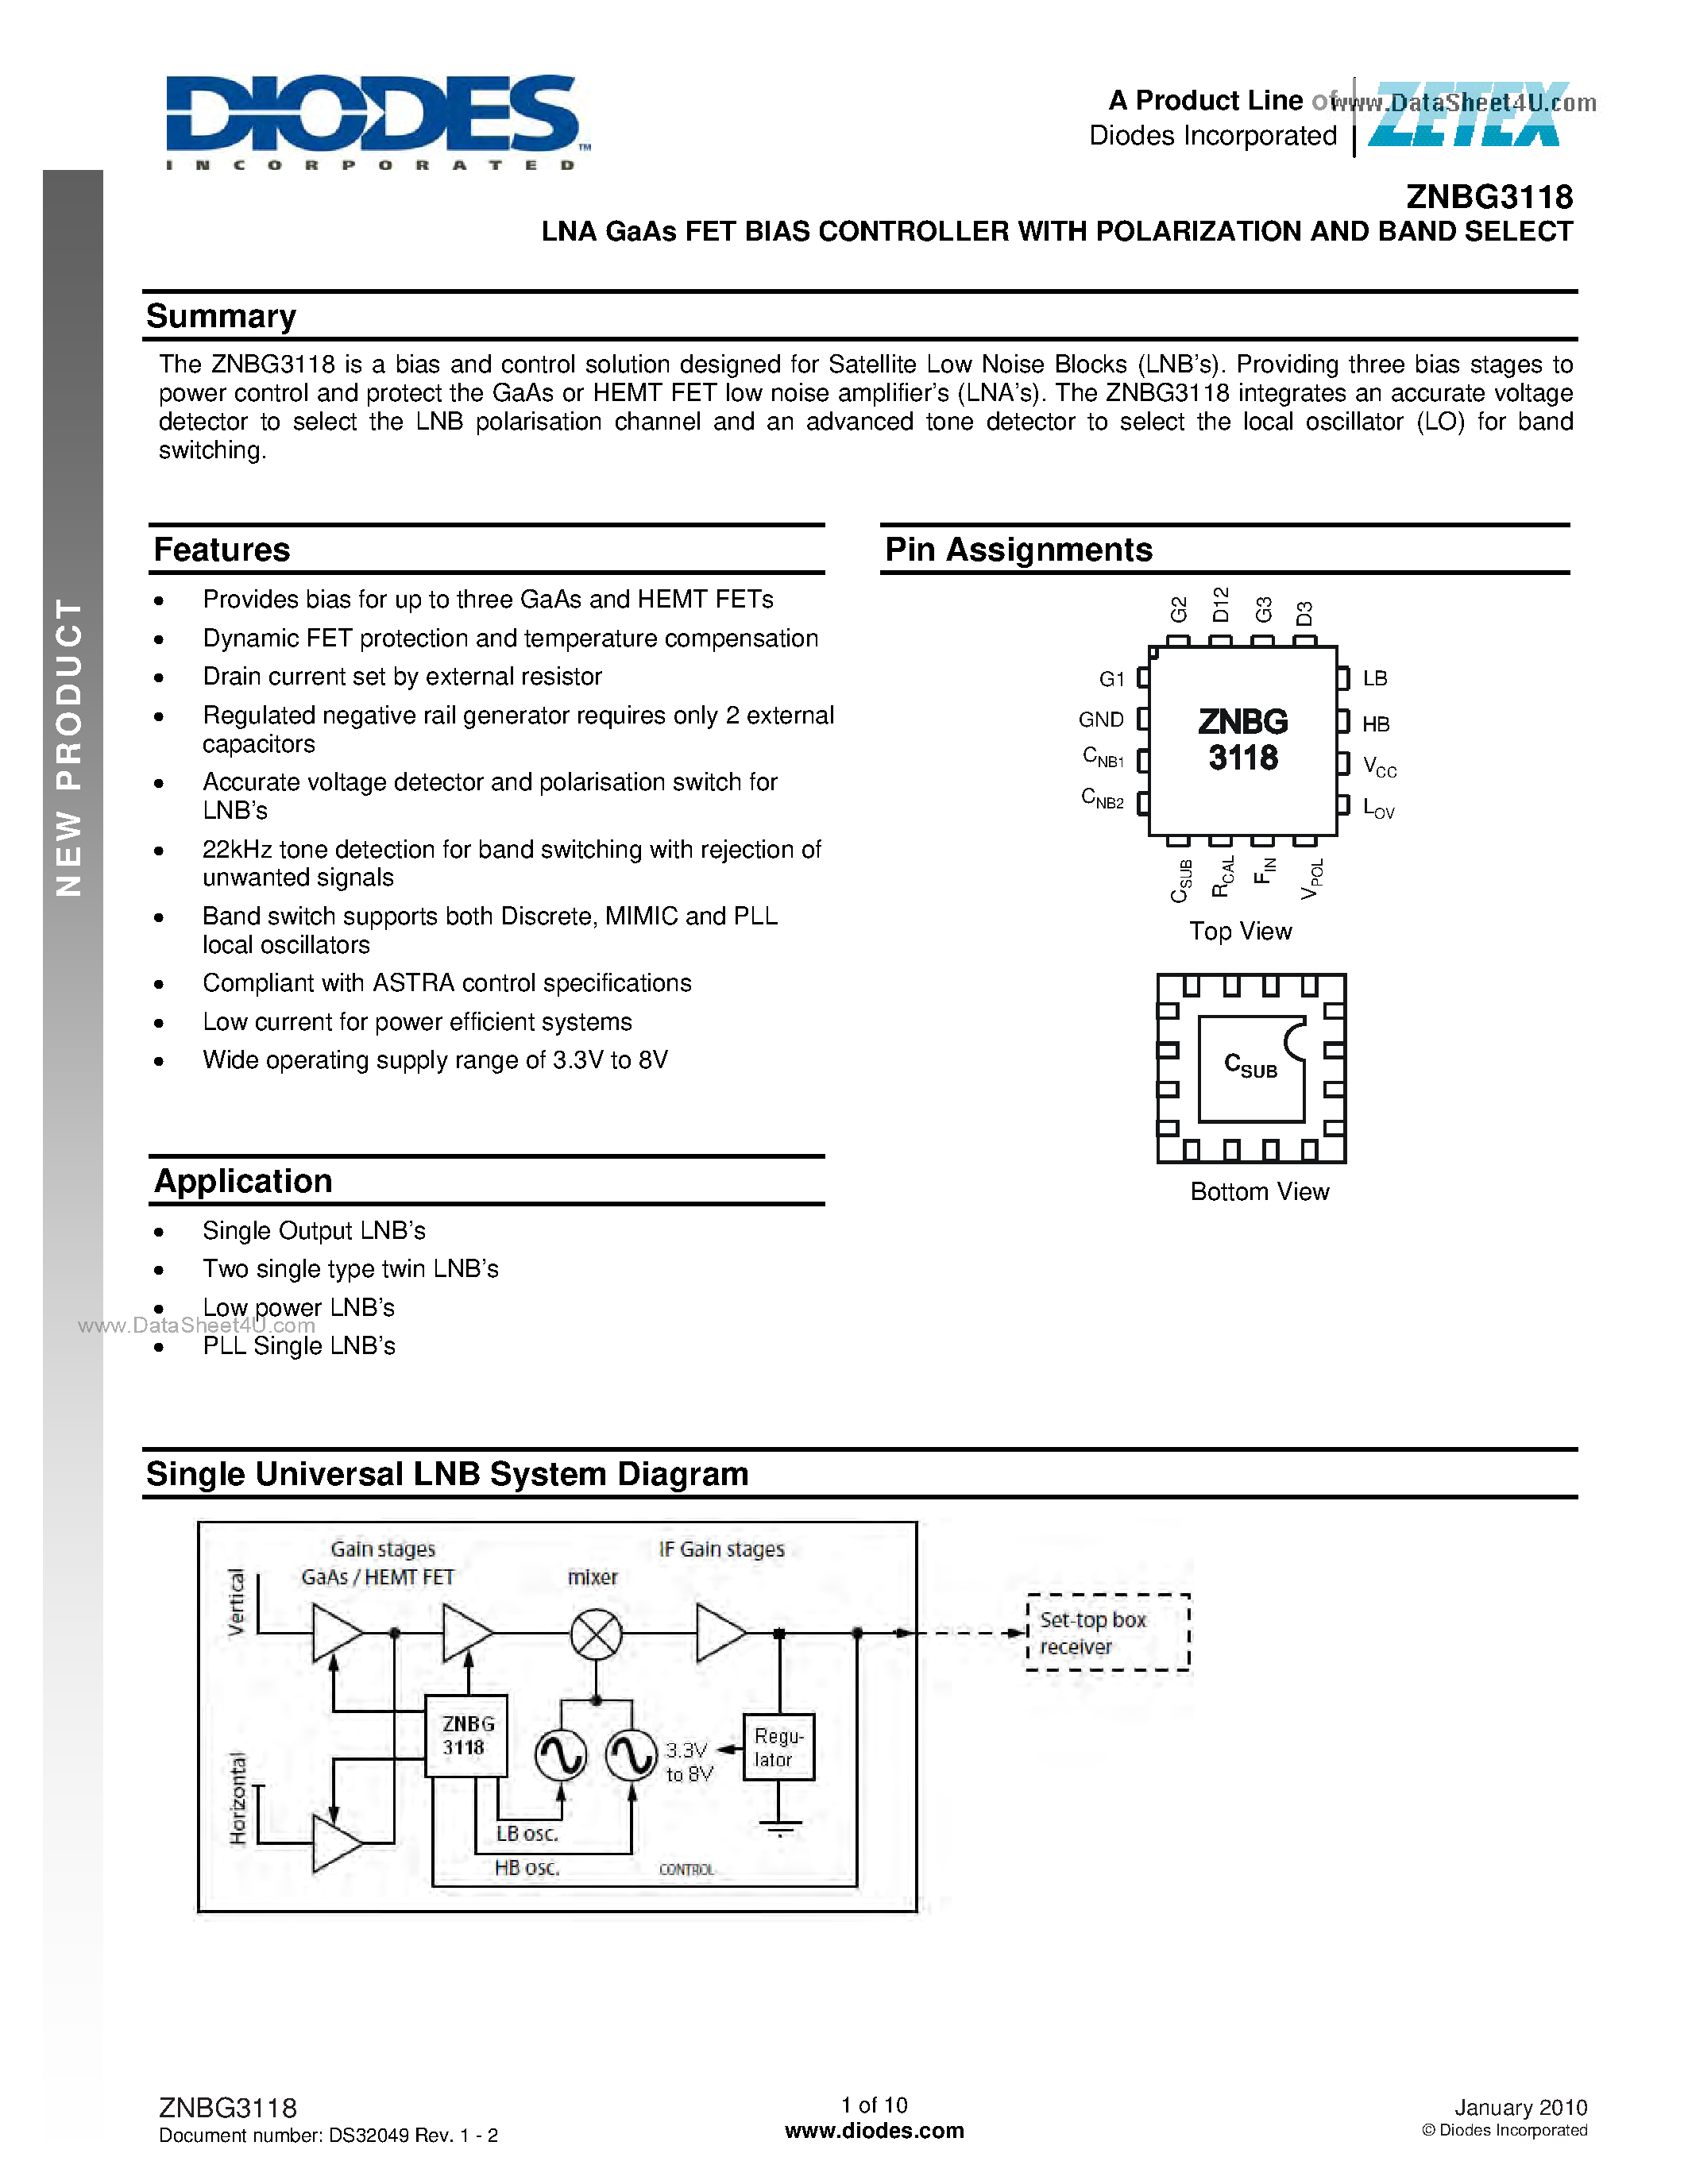 Datasheet ZNBG3118 - A Flexible Bias And Control Solution page 1